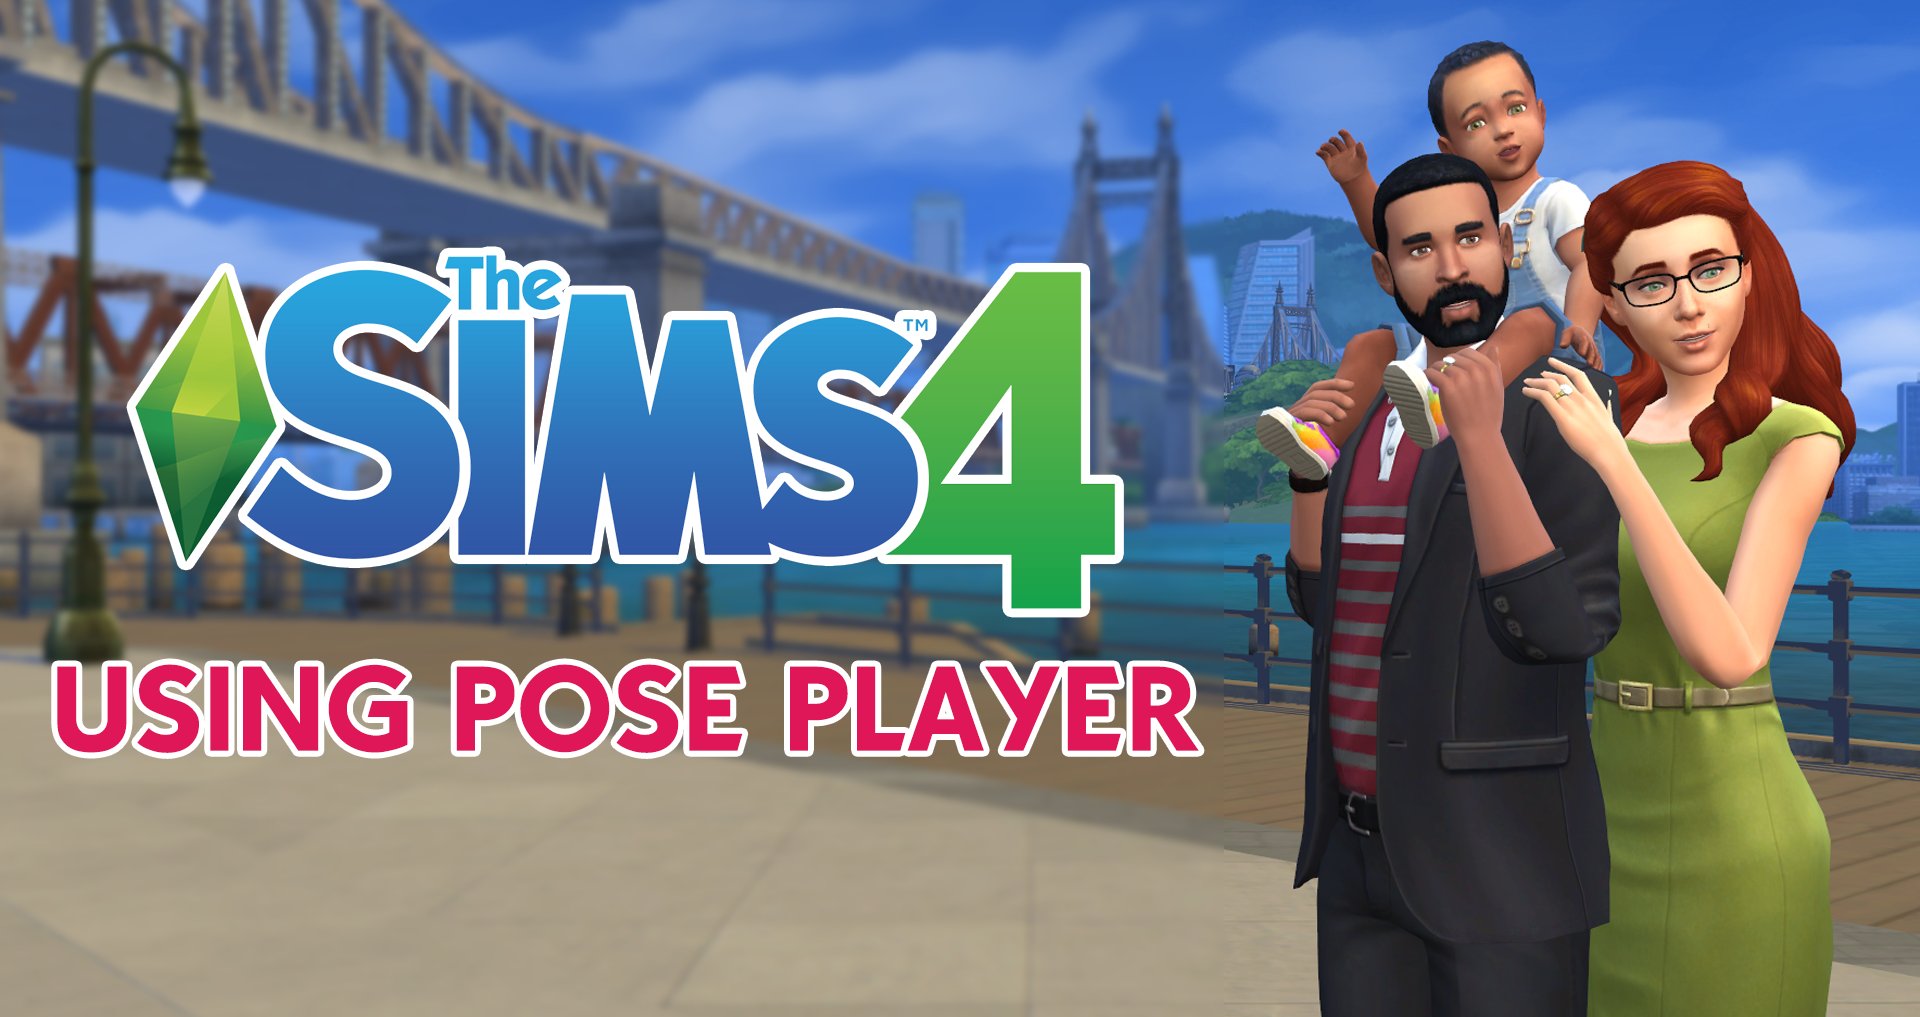 Our First Kiss POSEPACK | Sims 4 couple poses, Sims 4, Sims 4 piercings